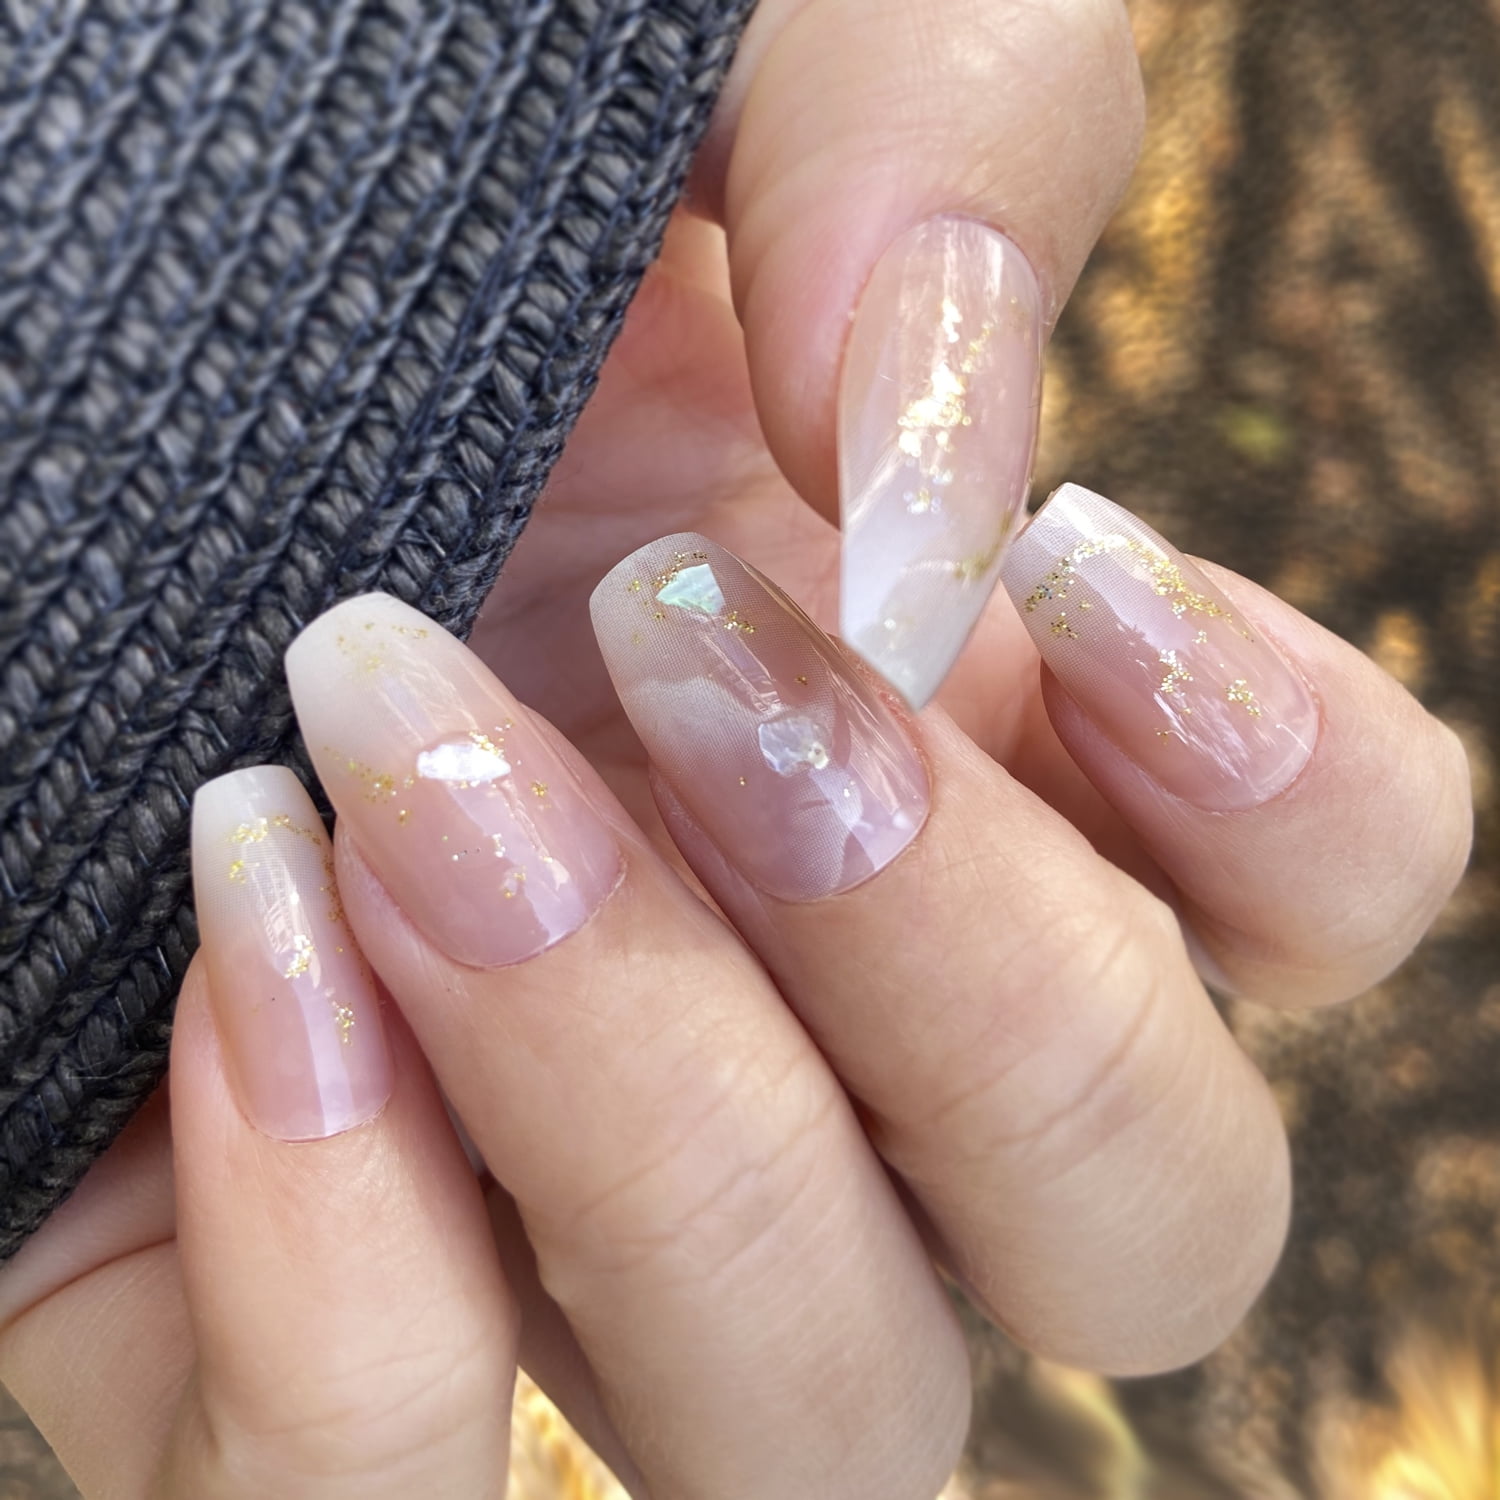 Acrylic Nails vs Gel Nails - Difference and Comparison | Diffen